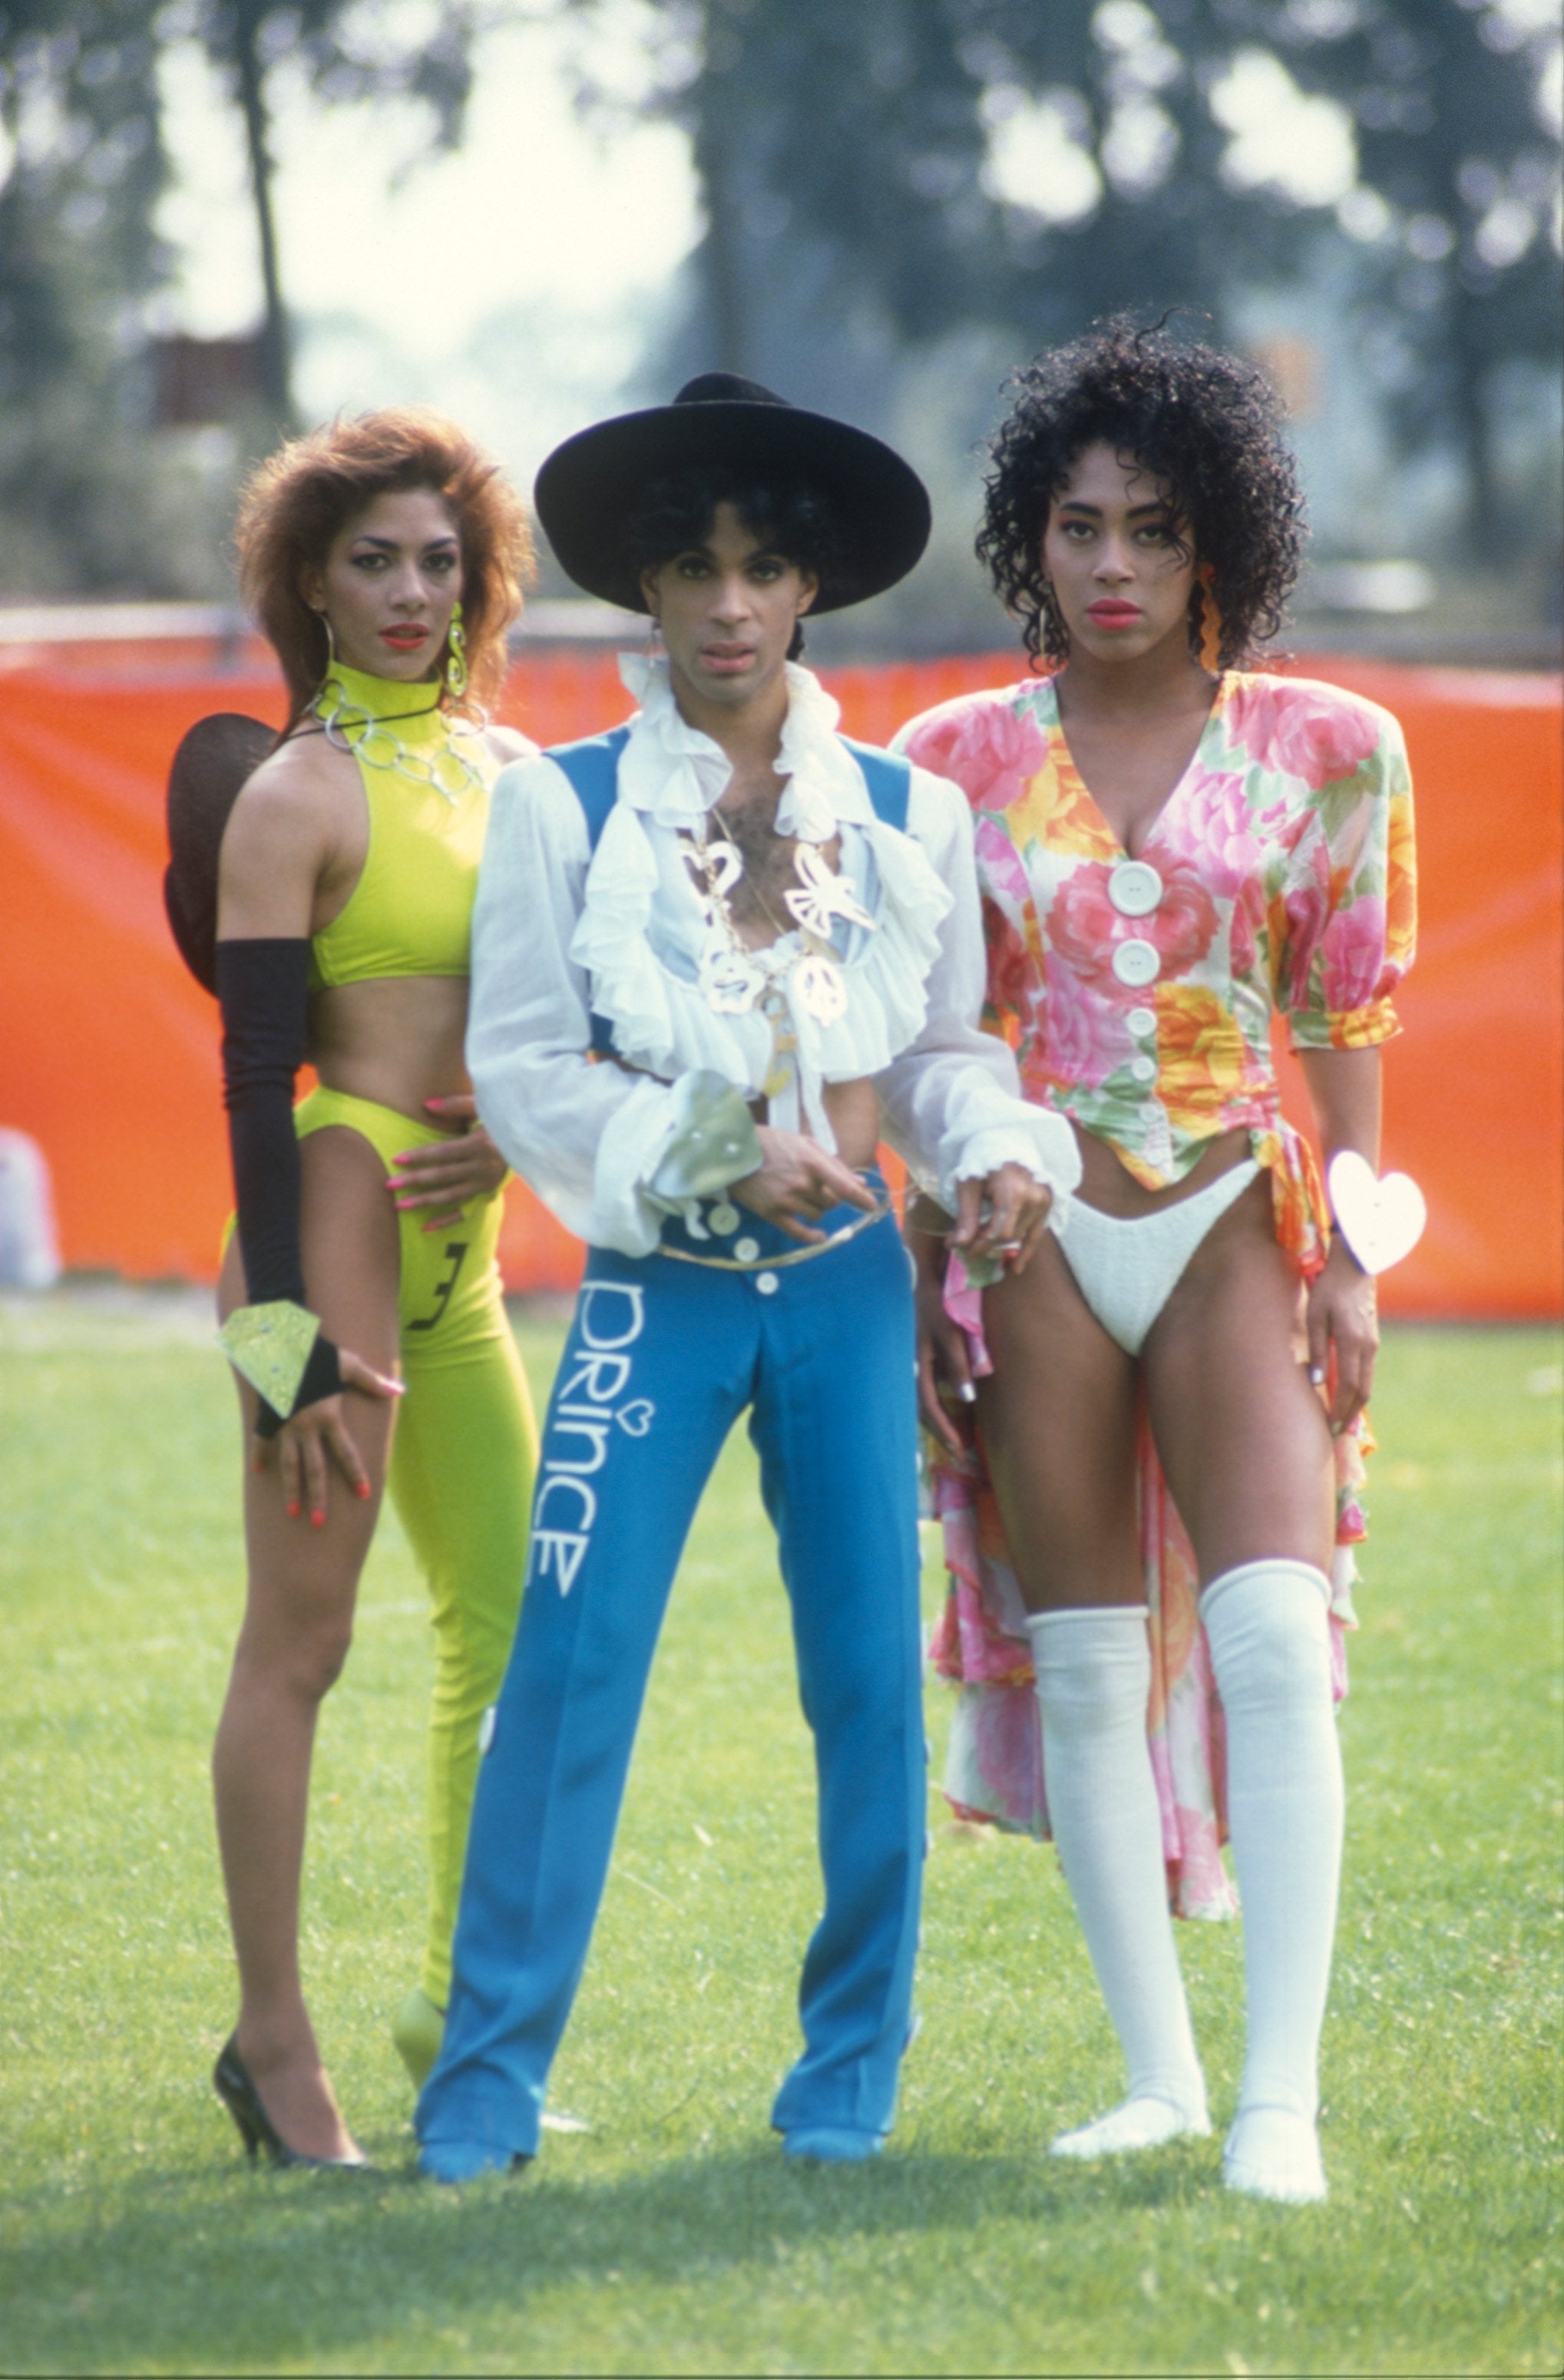 13 Times Prince Showed Us That Beauty Isn’t Just For The Ladies